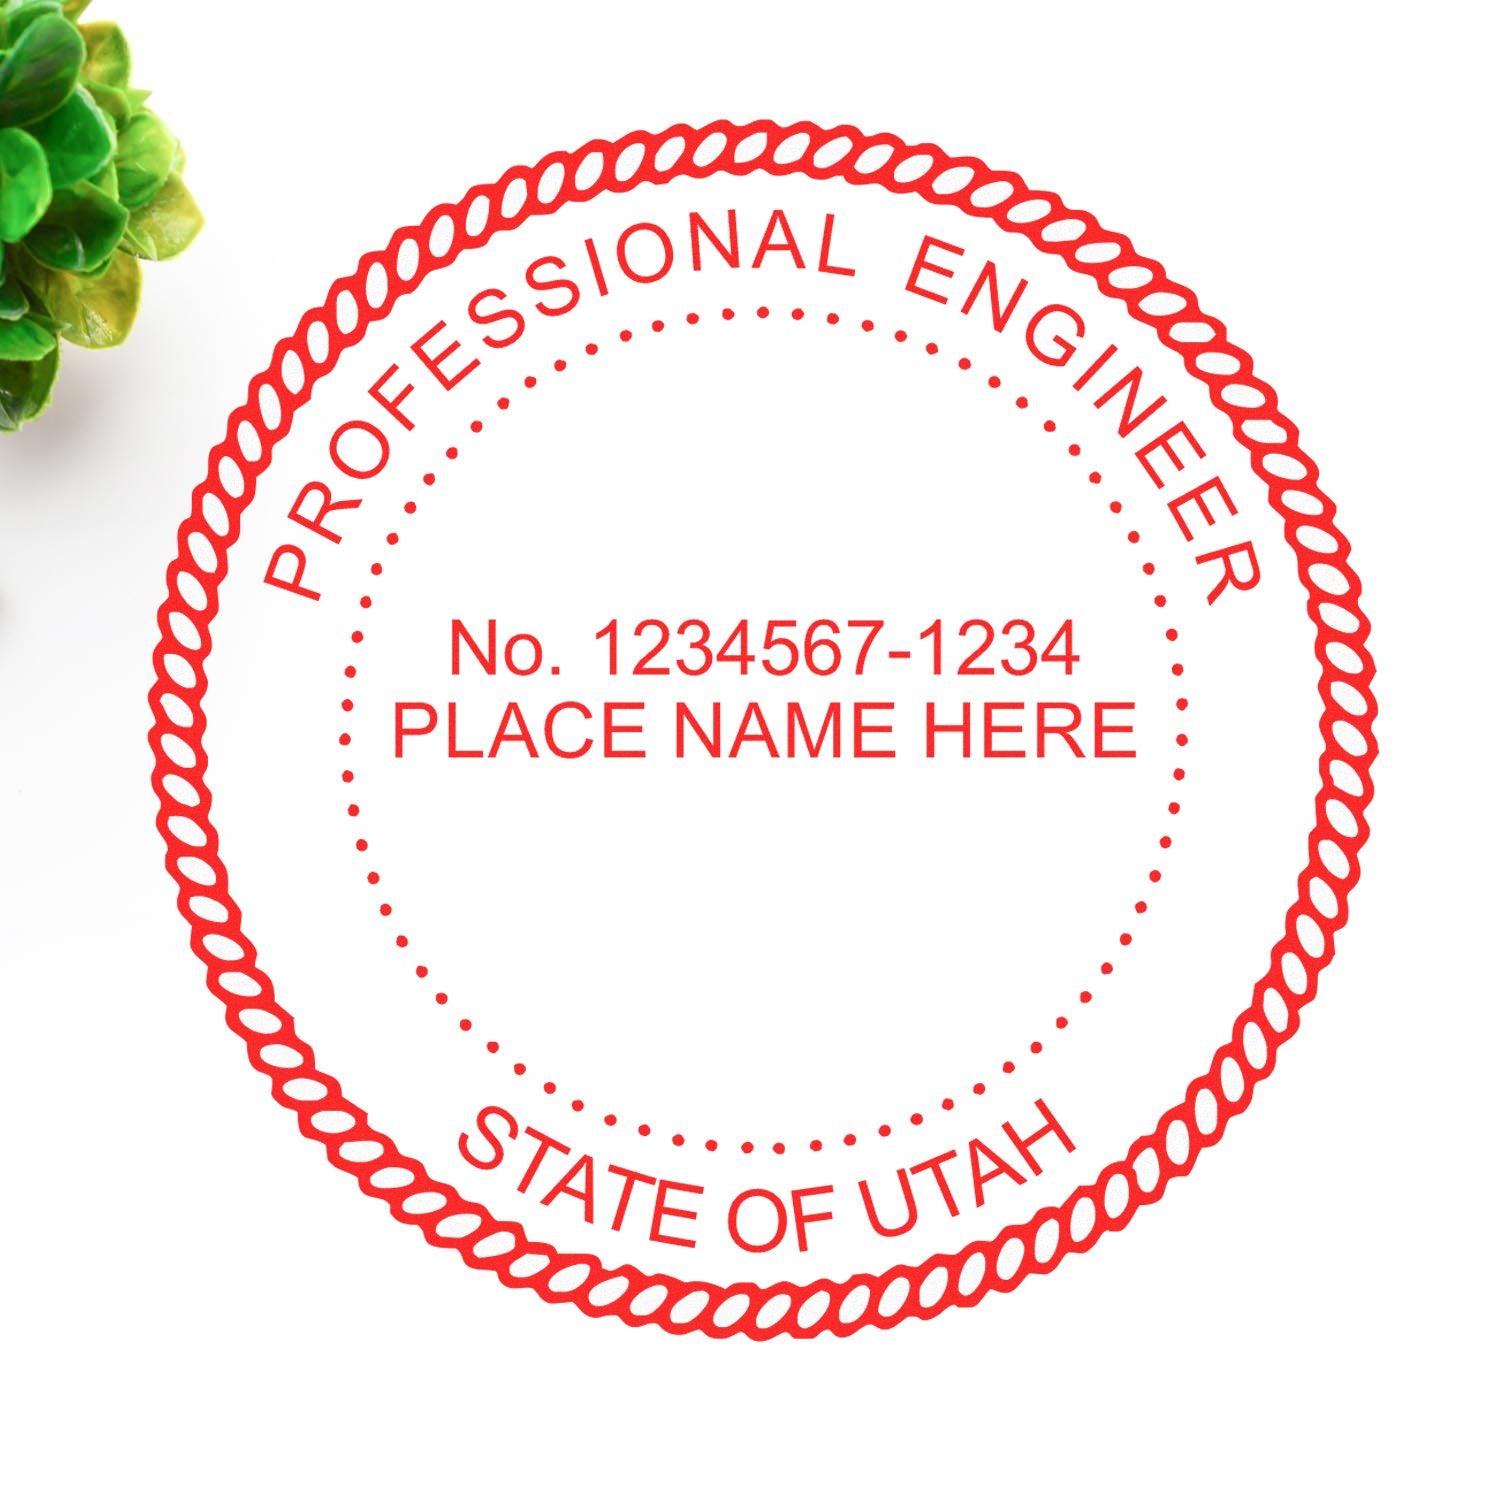 The main image for the Utah Professional Engineer Seal Stamp depicting a sample of the imprint and electronic files